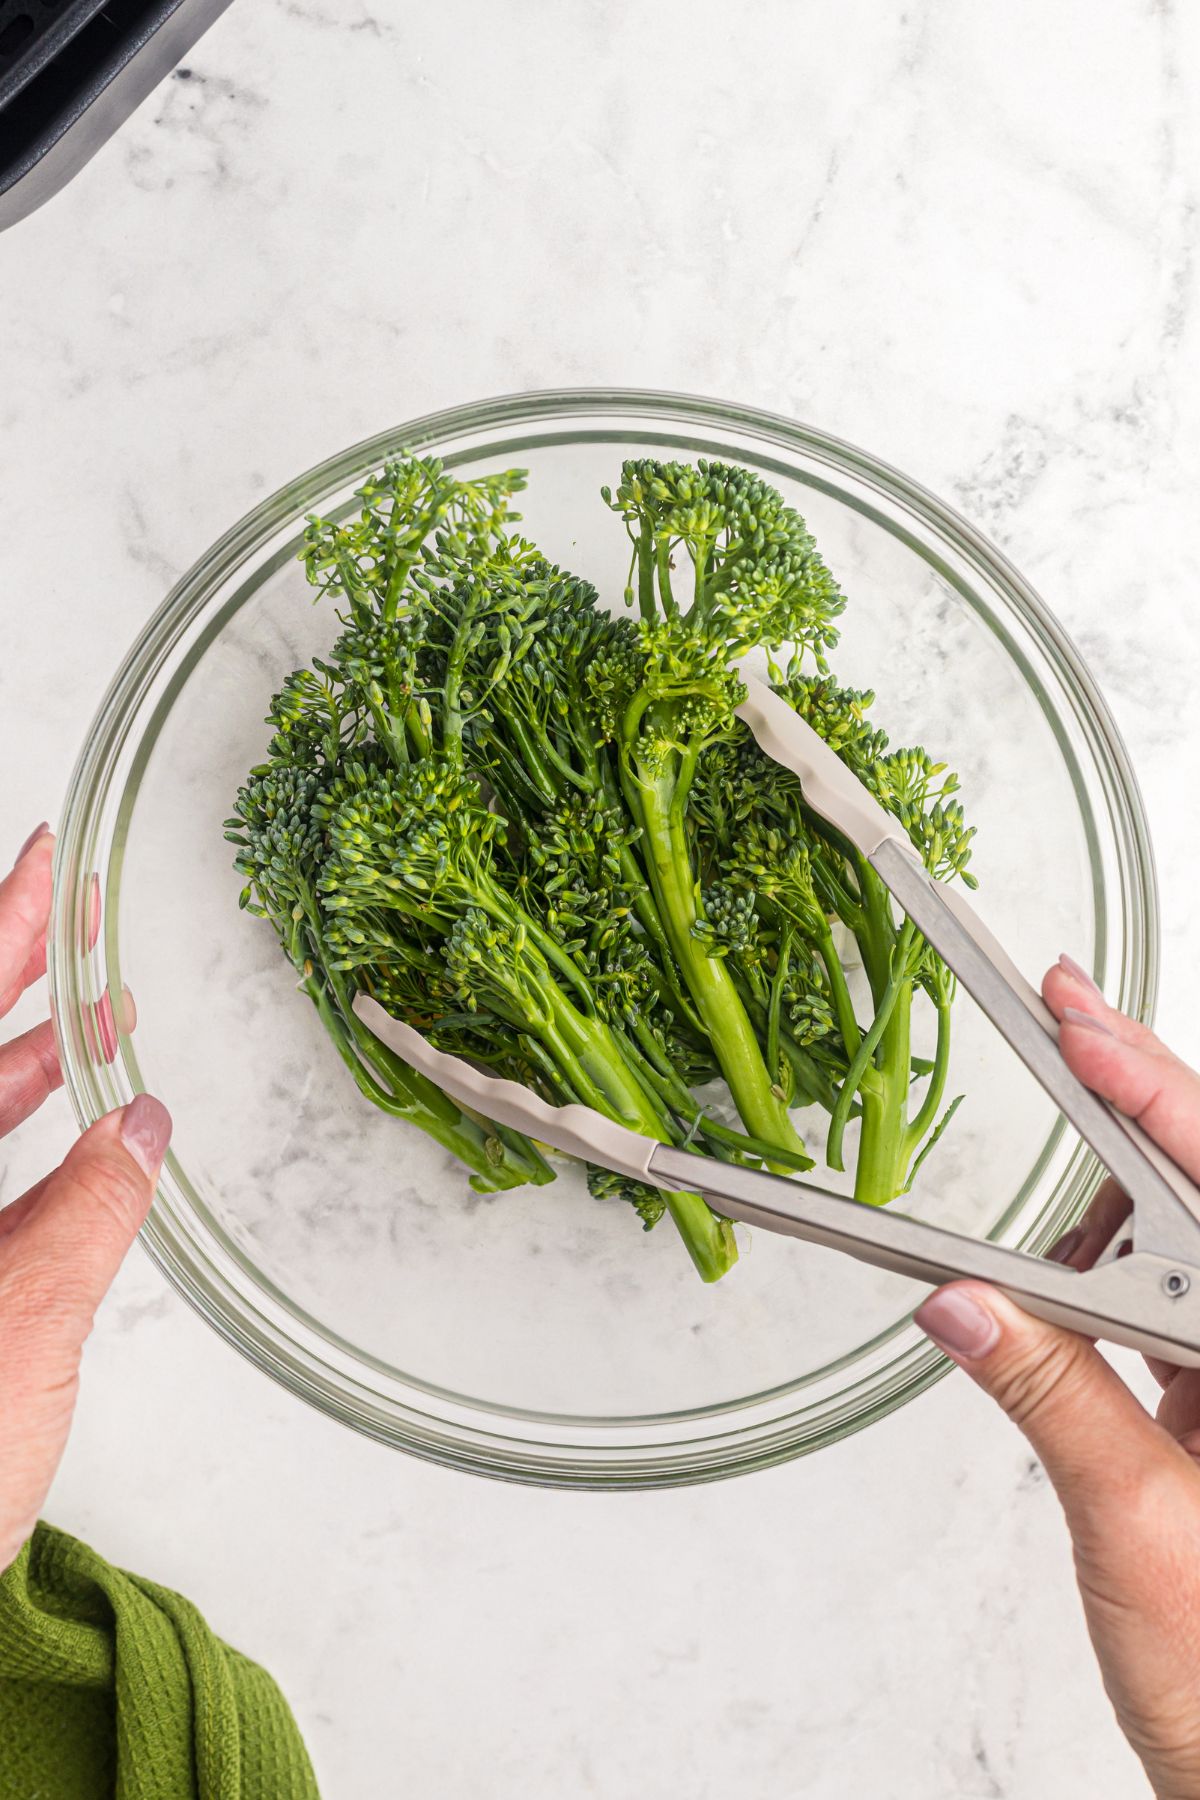 Broccolini florets being tossed in a glass bowl with garlic and seasonings